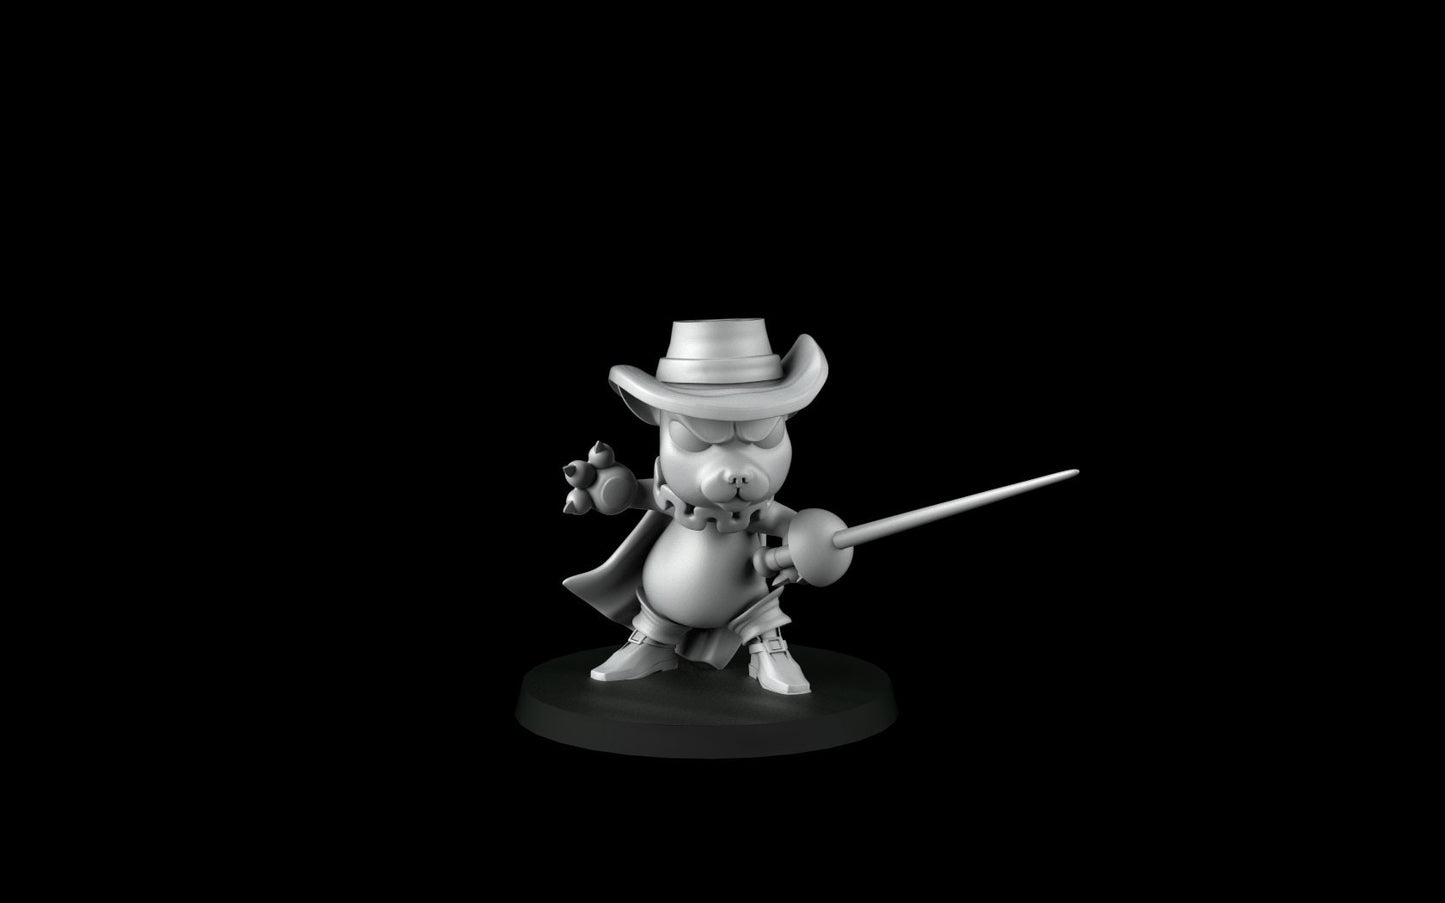 Puss in boots (32mm) - Angry Princesses - ideal for Dungeons and Dragons and other Tabletop RPGs